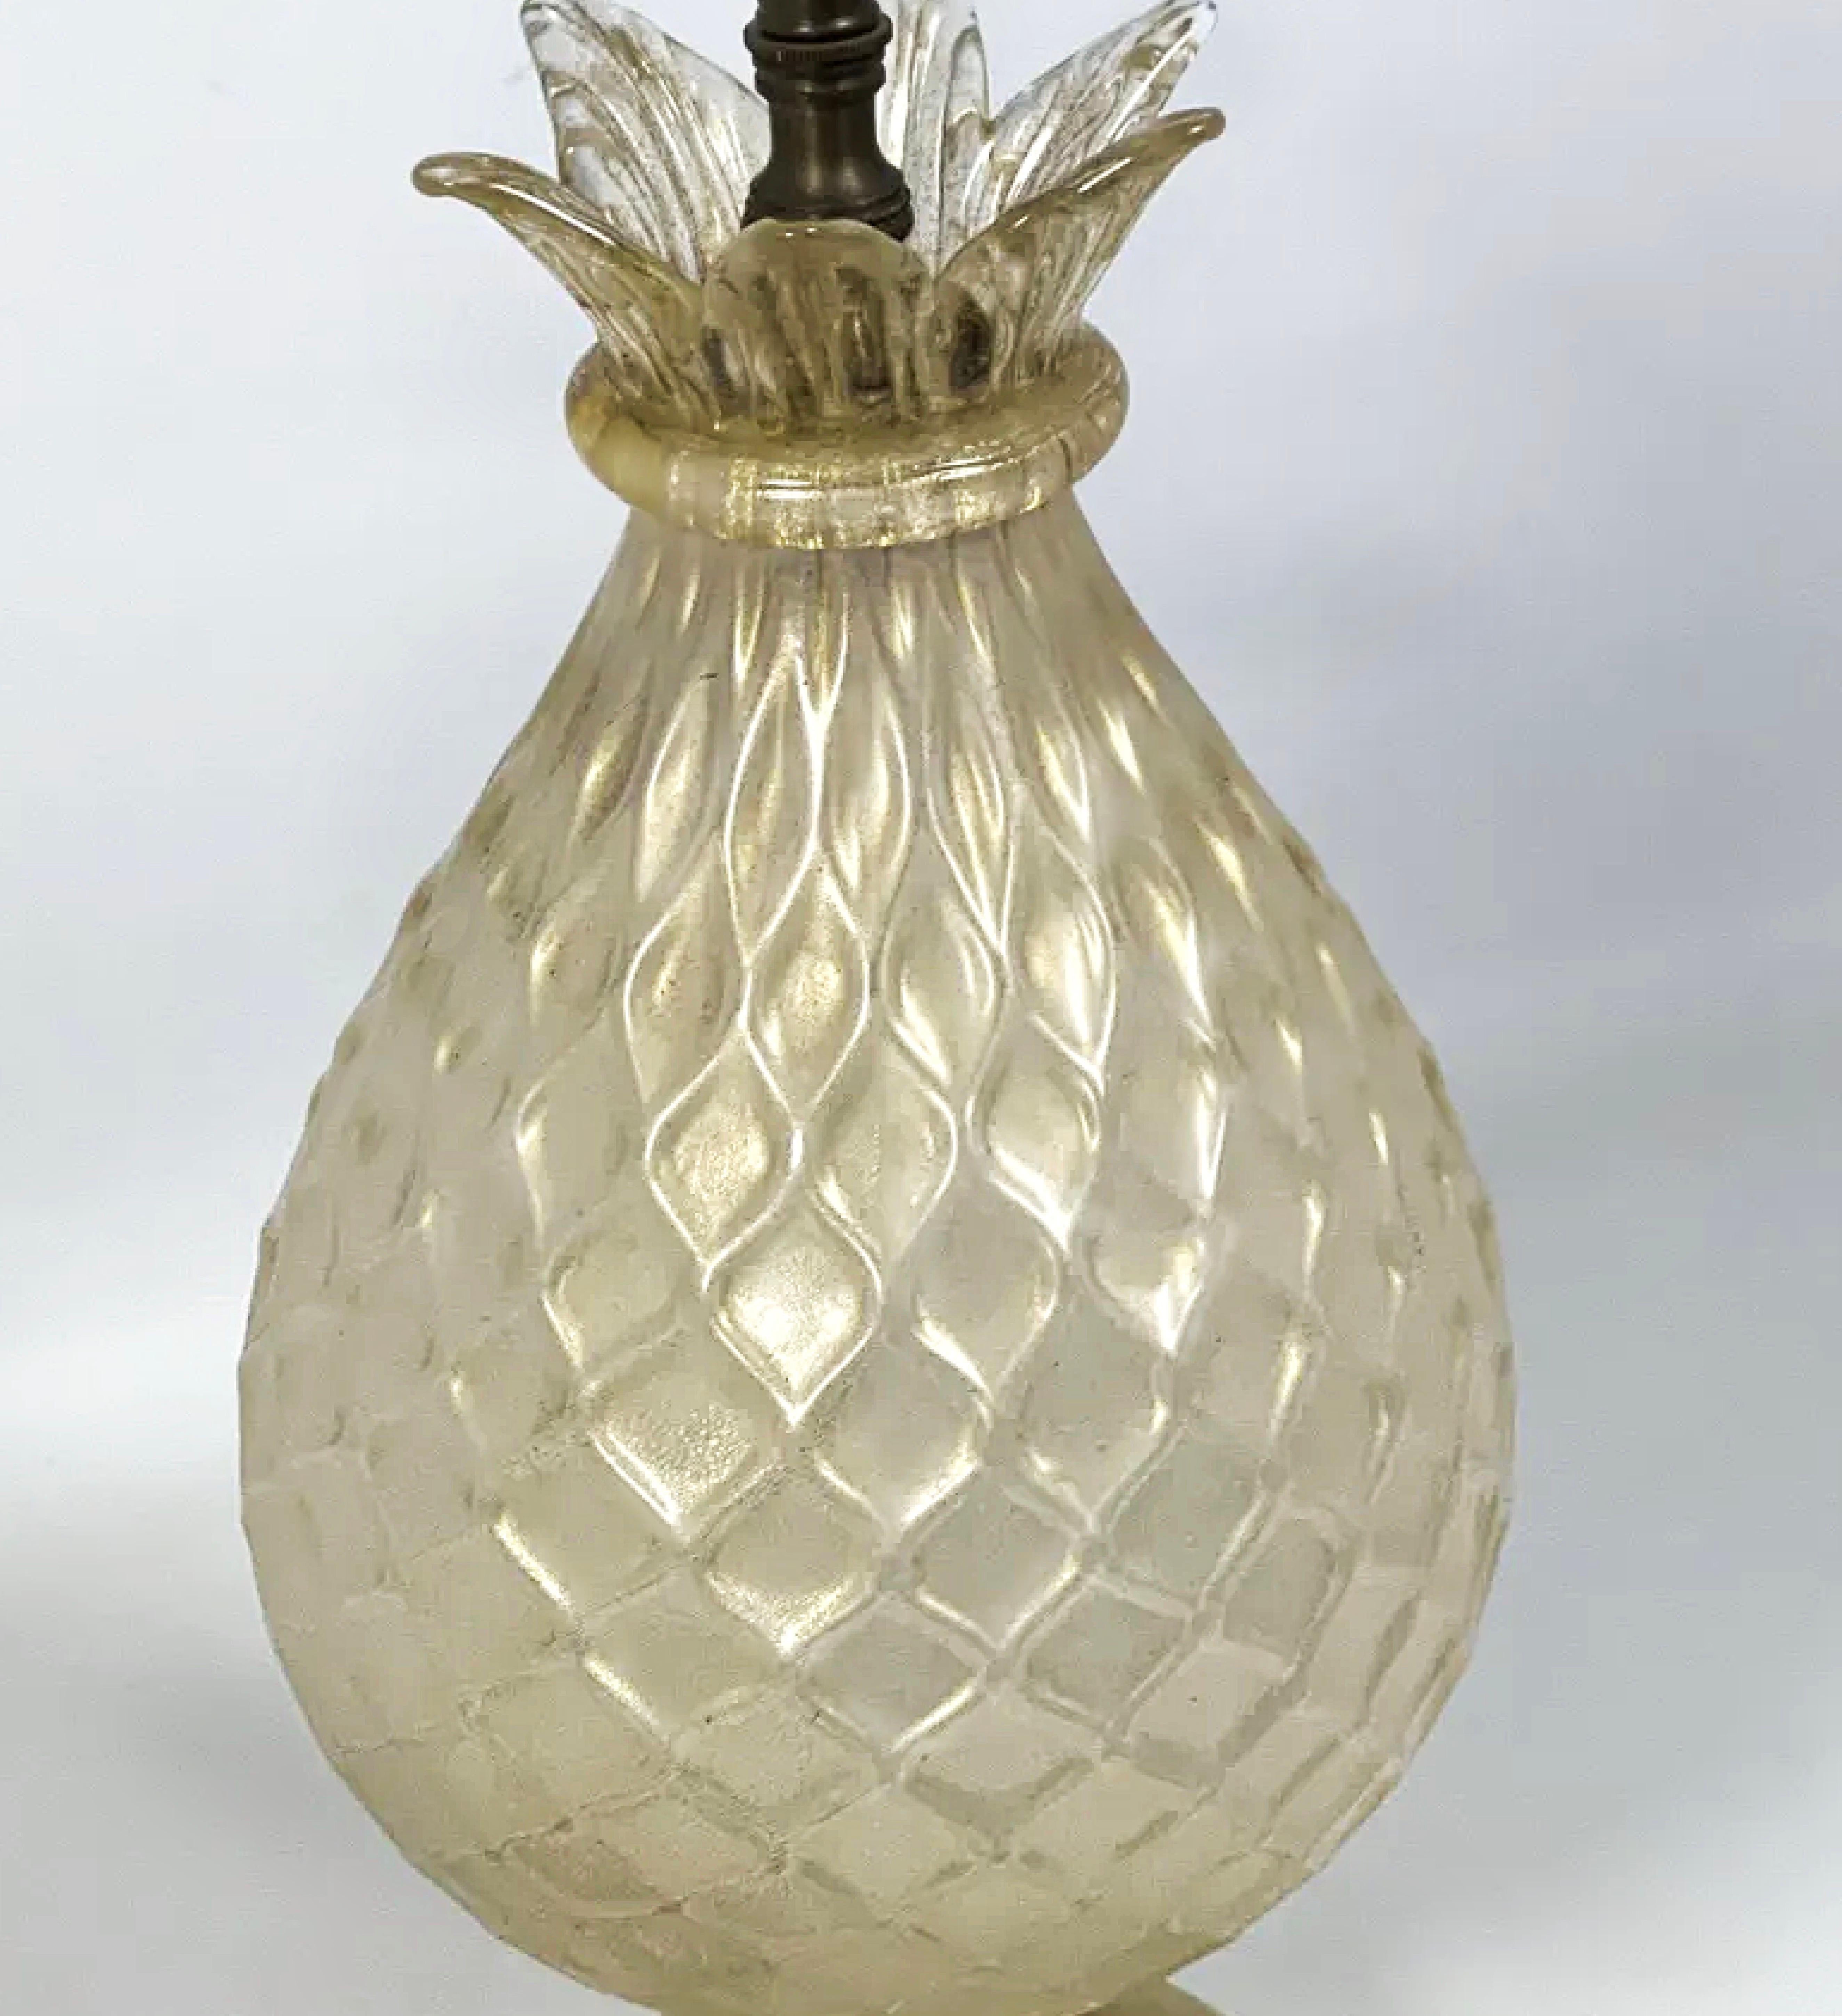 Barovier and Toso Murano Art Glass Pineapple Table Lamp, 1950s. Labelled.  Cream and gold.  Label dates this piece to between 1936-1955. Very rare to find an original Brovier piece from the early Ercole Barovier era that retains its label.  The